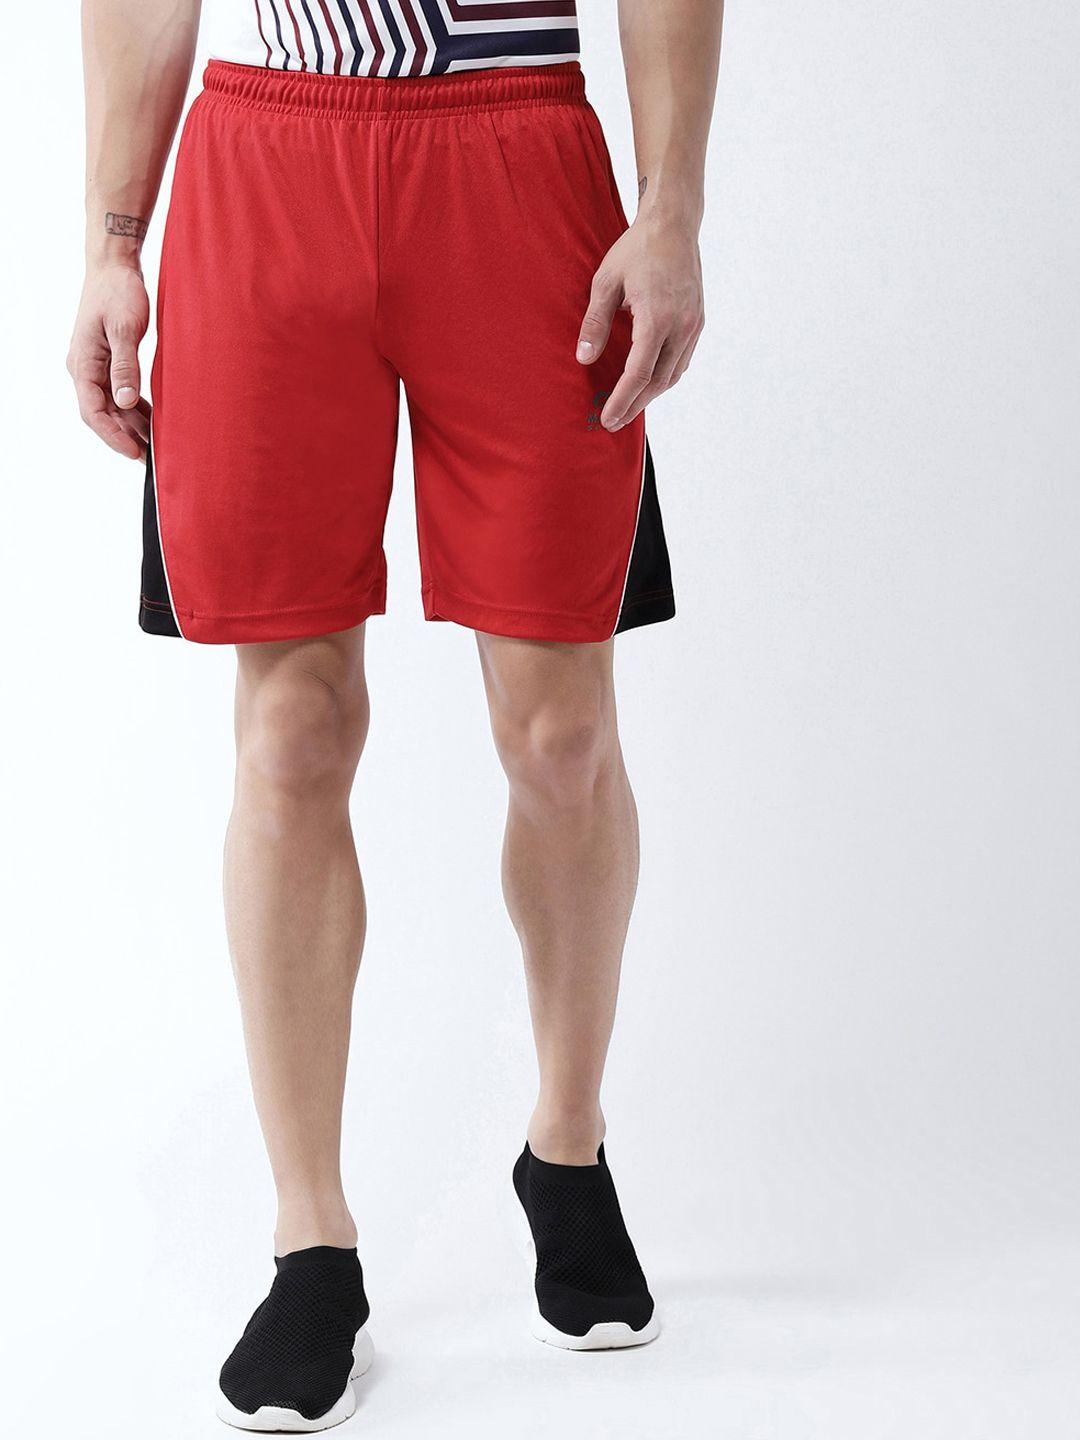 masch-sports-men-red-training-or-gym-sports-shorts